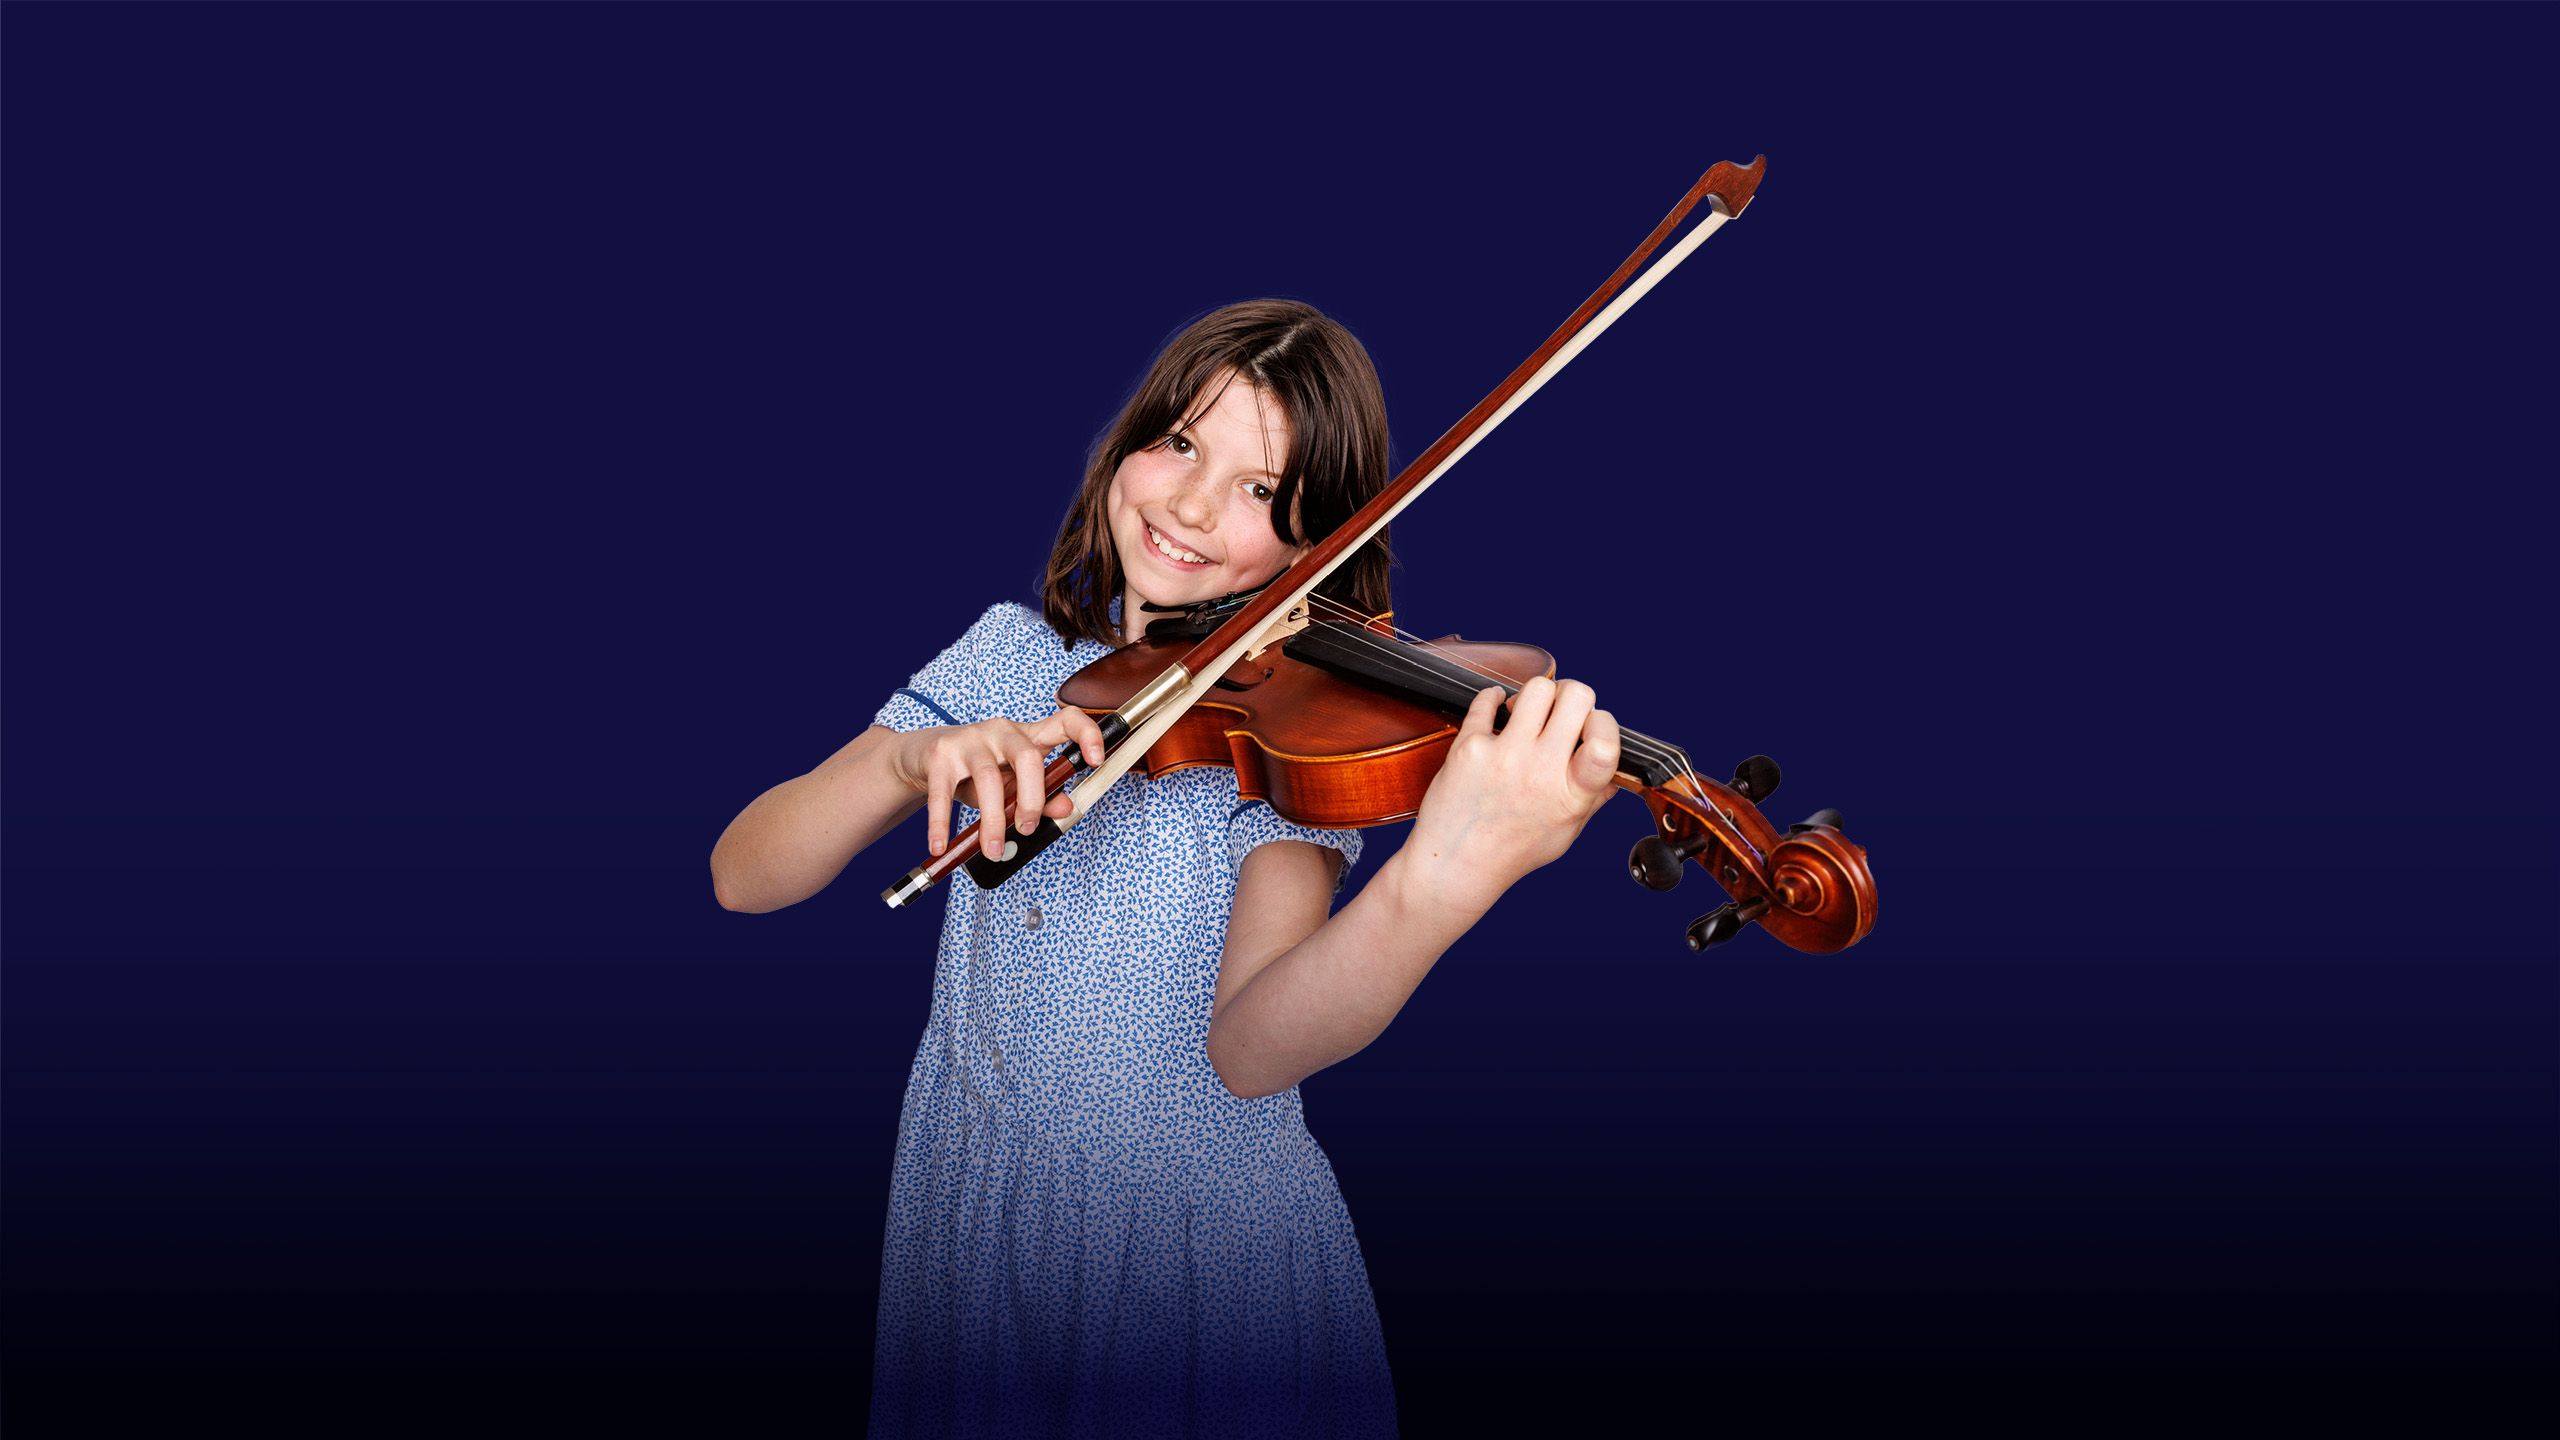 Image of a smiling girl at a violin playing position with an overlay of the text "inspiring minds" 